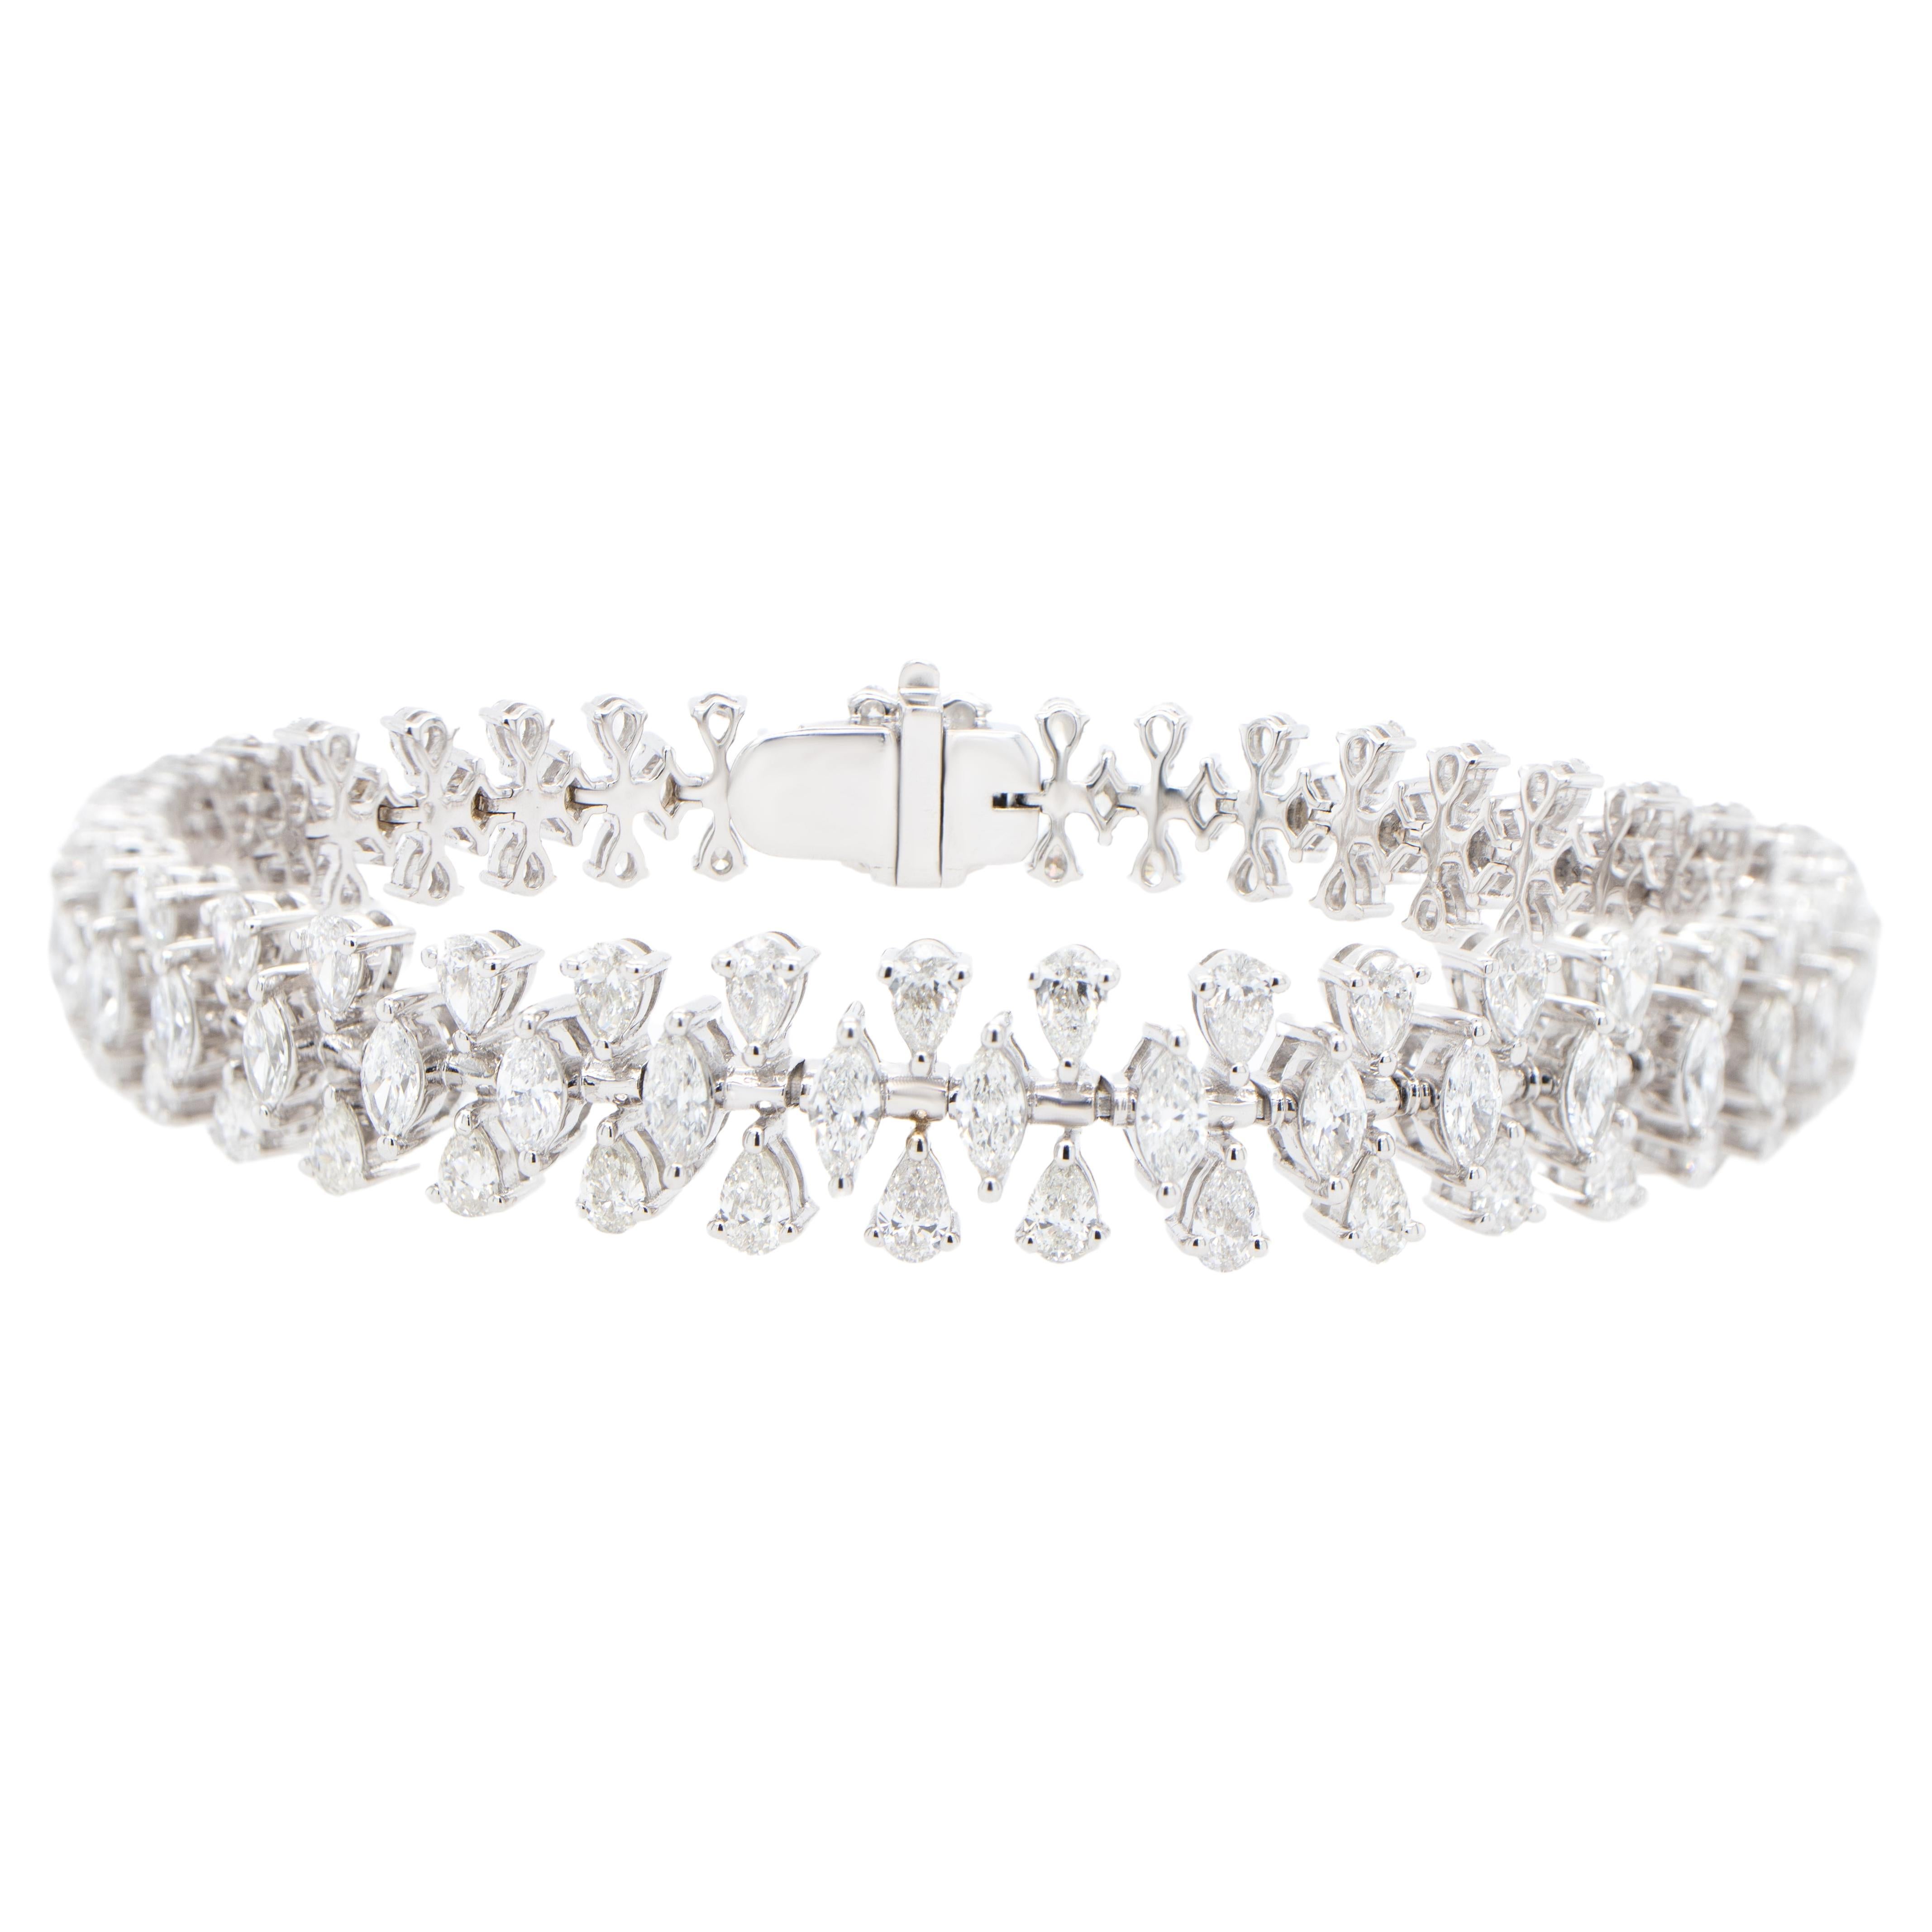 Important Marquise and Pear Cut Diamond Bracelet 6.65 Carats 18K White Gold For Sale